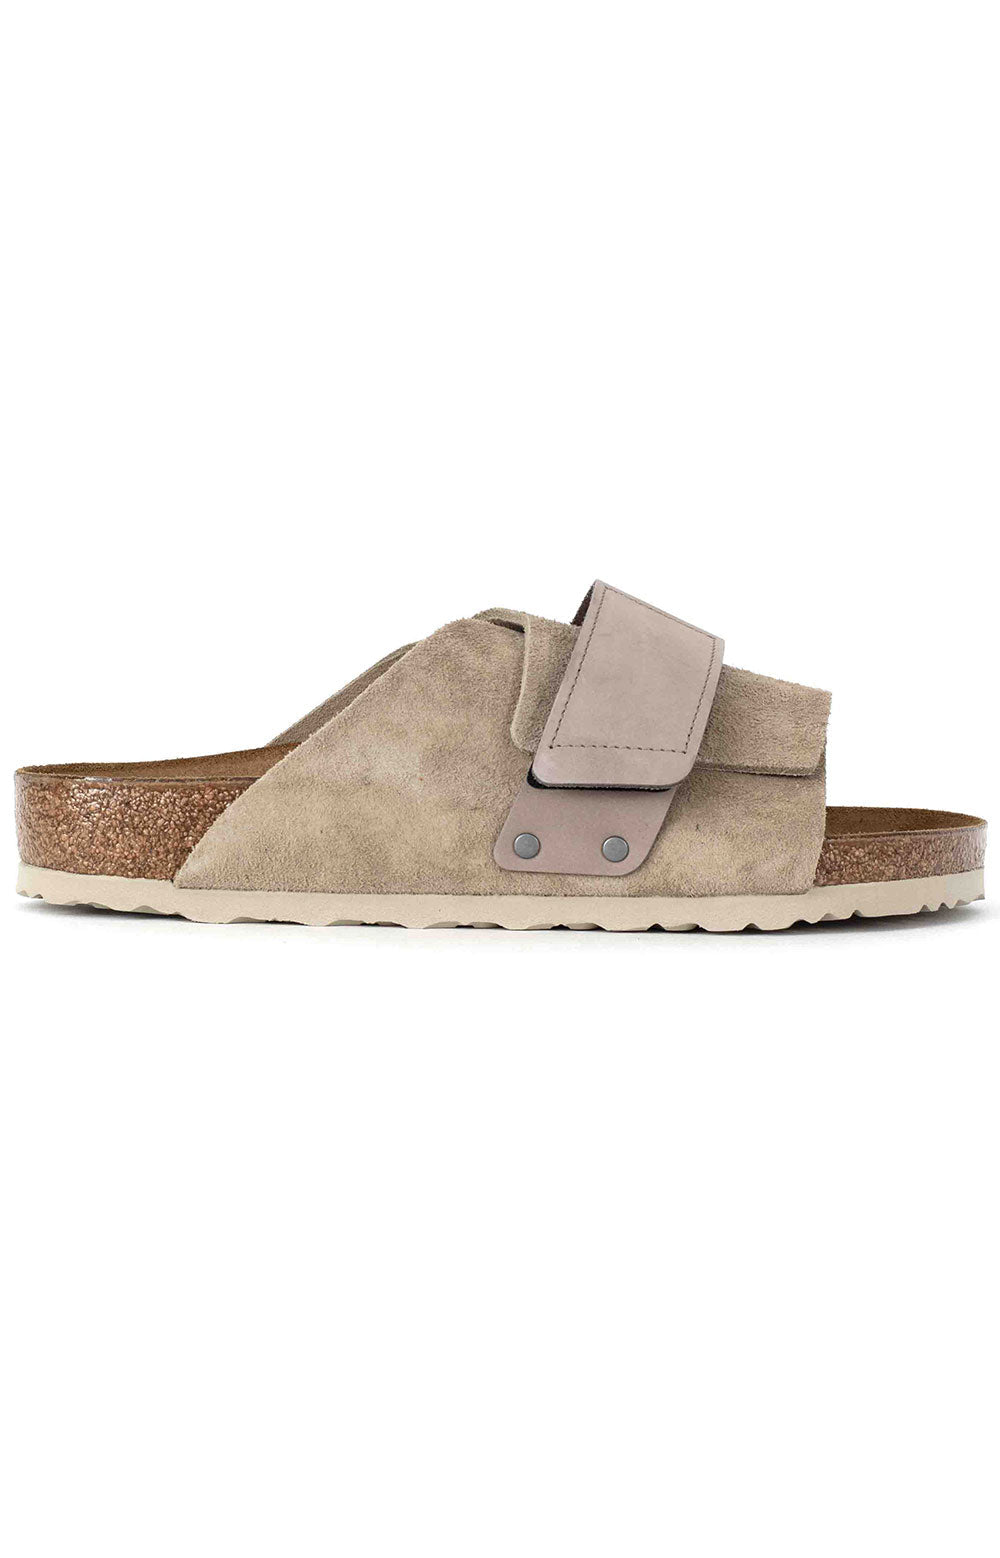 Close-up of Birkenstock Kyoto Sandals Taupe BR1015572 in taupe color